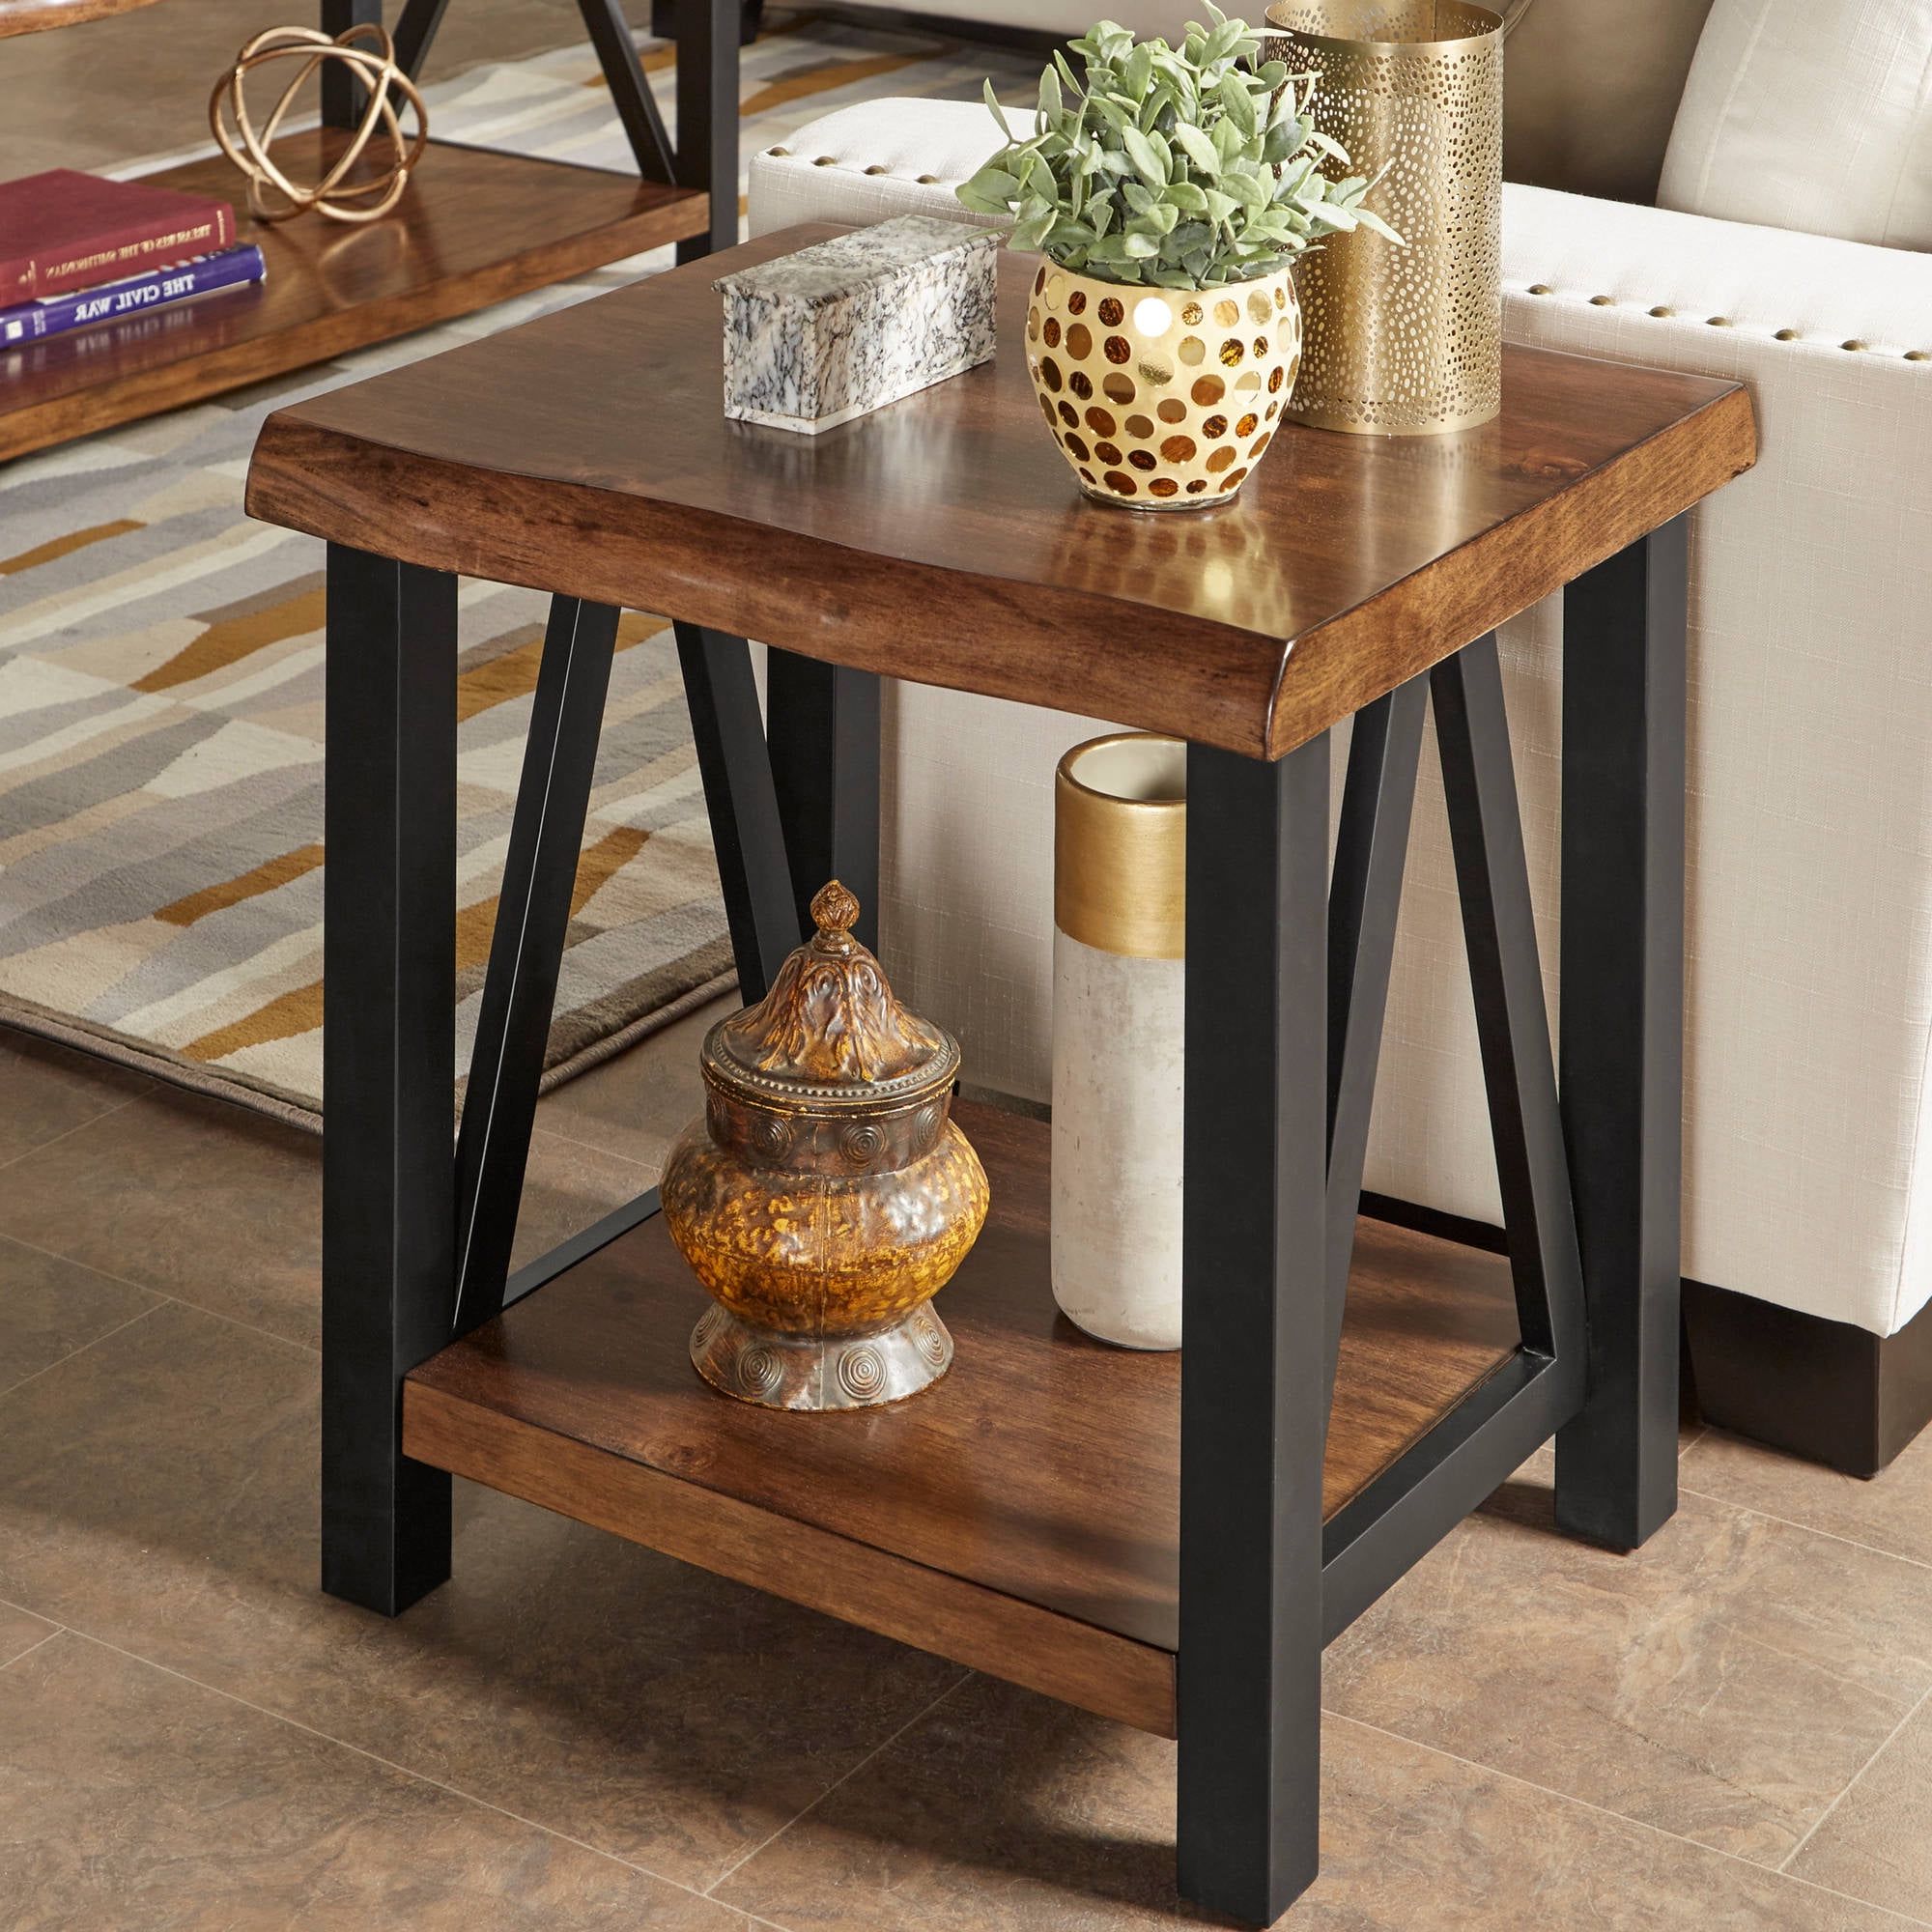 Weston Home Rustic Metal Base End Table With Natural Edge Table Top And Inside Metal Side Tables For Living Spaces (View 6 of 20)